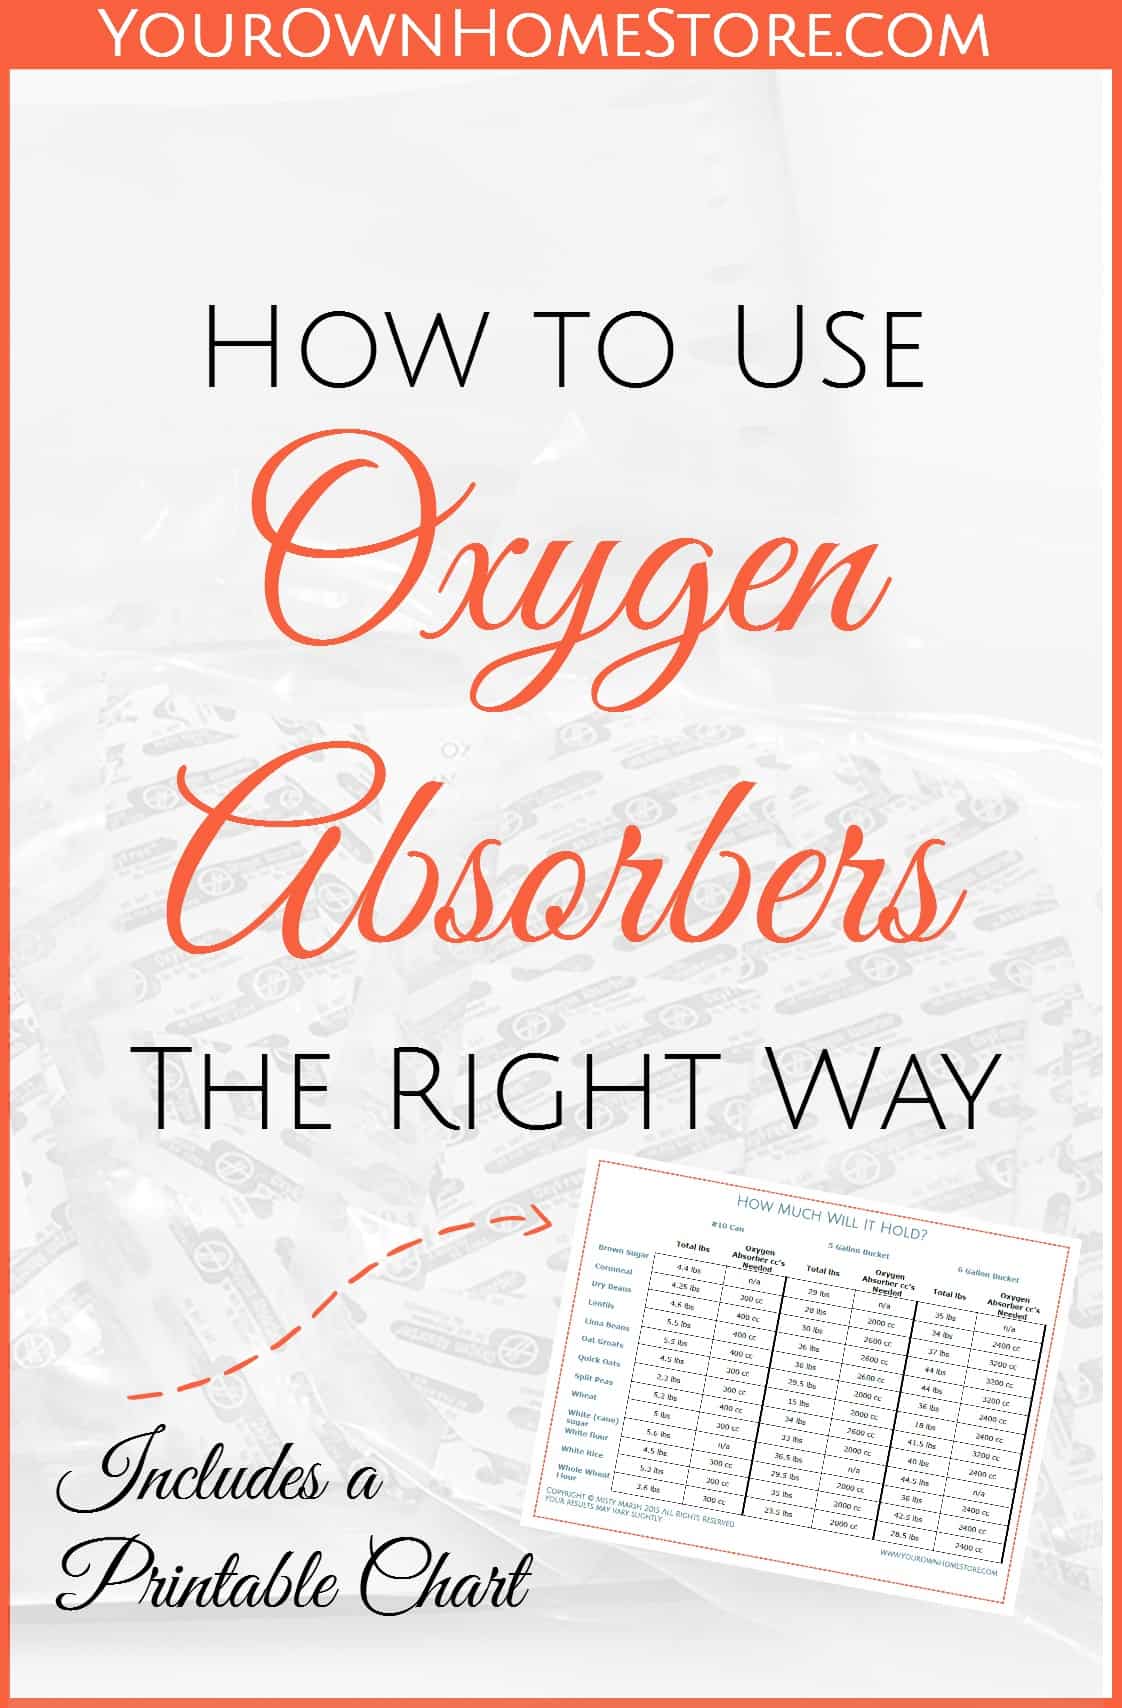 How to use oxygen absorbers | Long term food storage safety